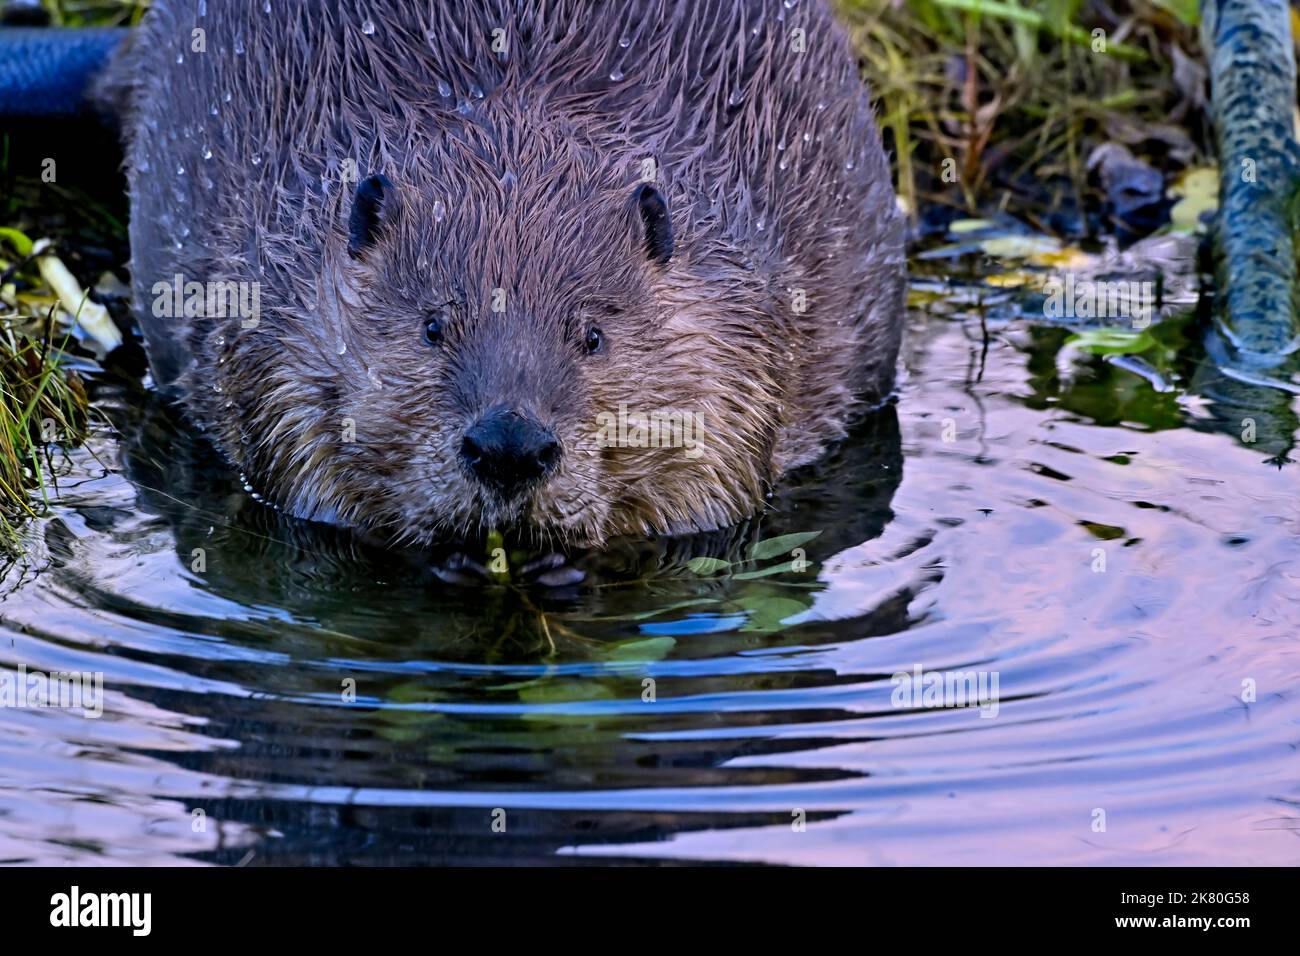 A wild beaver 'Castor canadensis', feeding in the shallow water of his beaver pond in rural Alberta Canada. Stock Photo